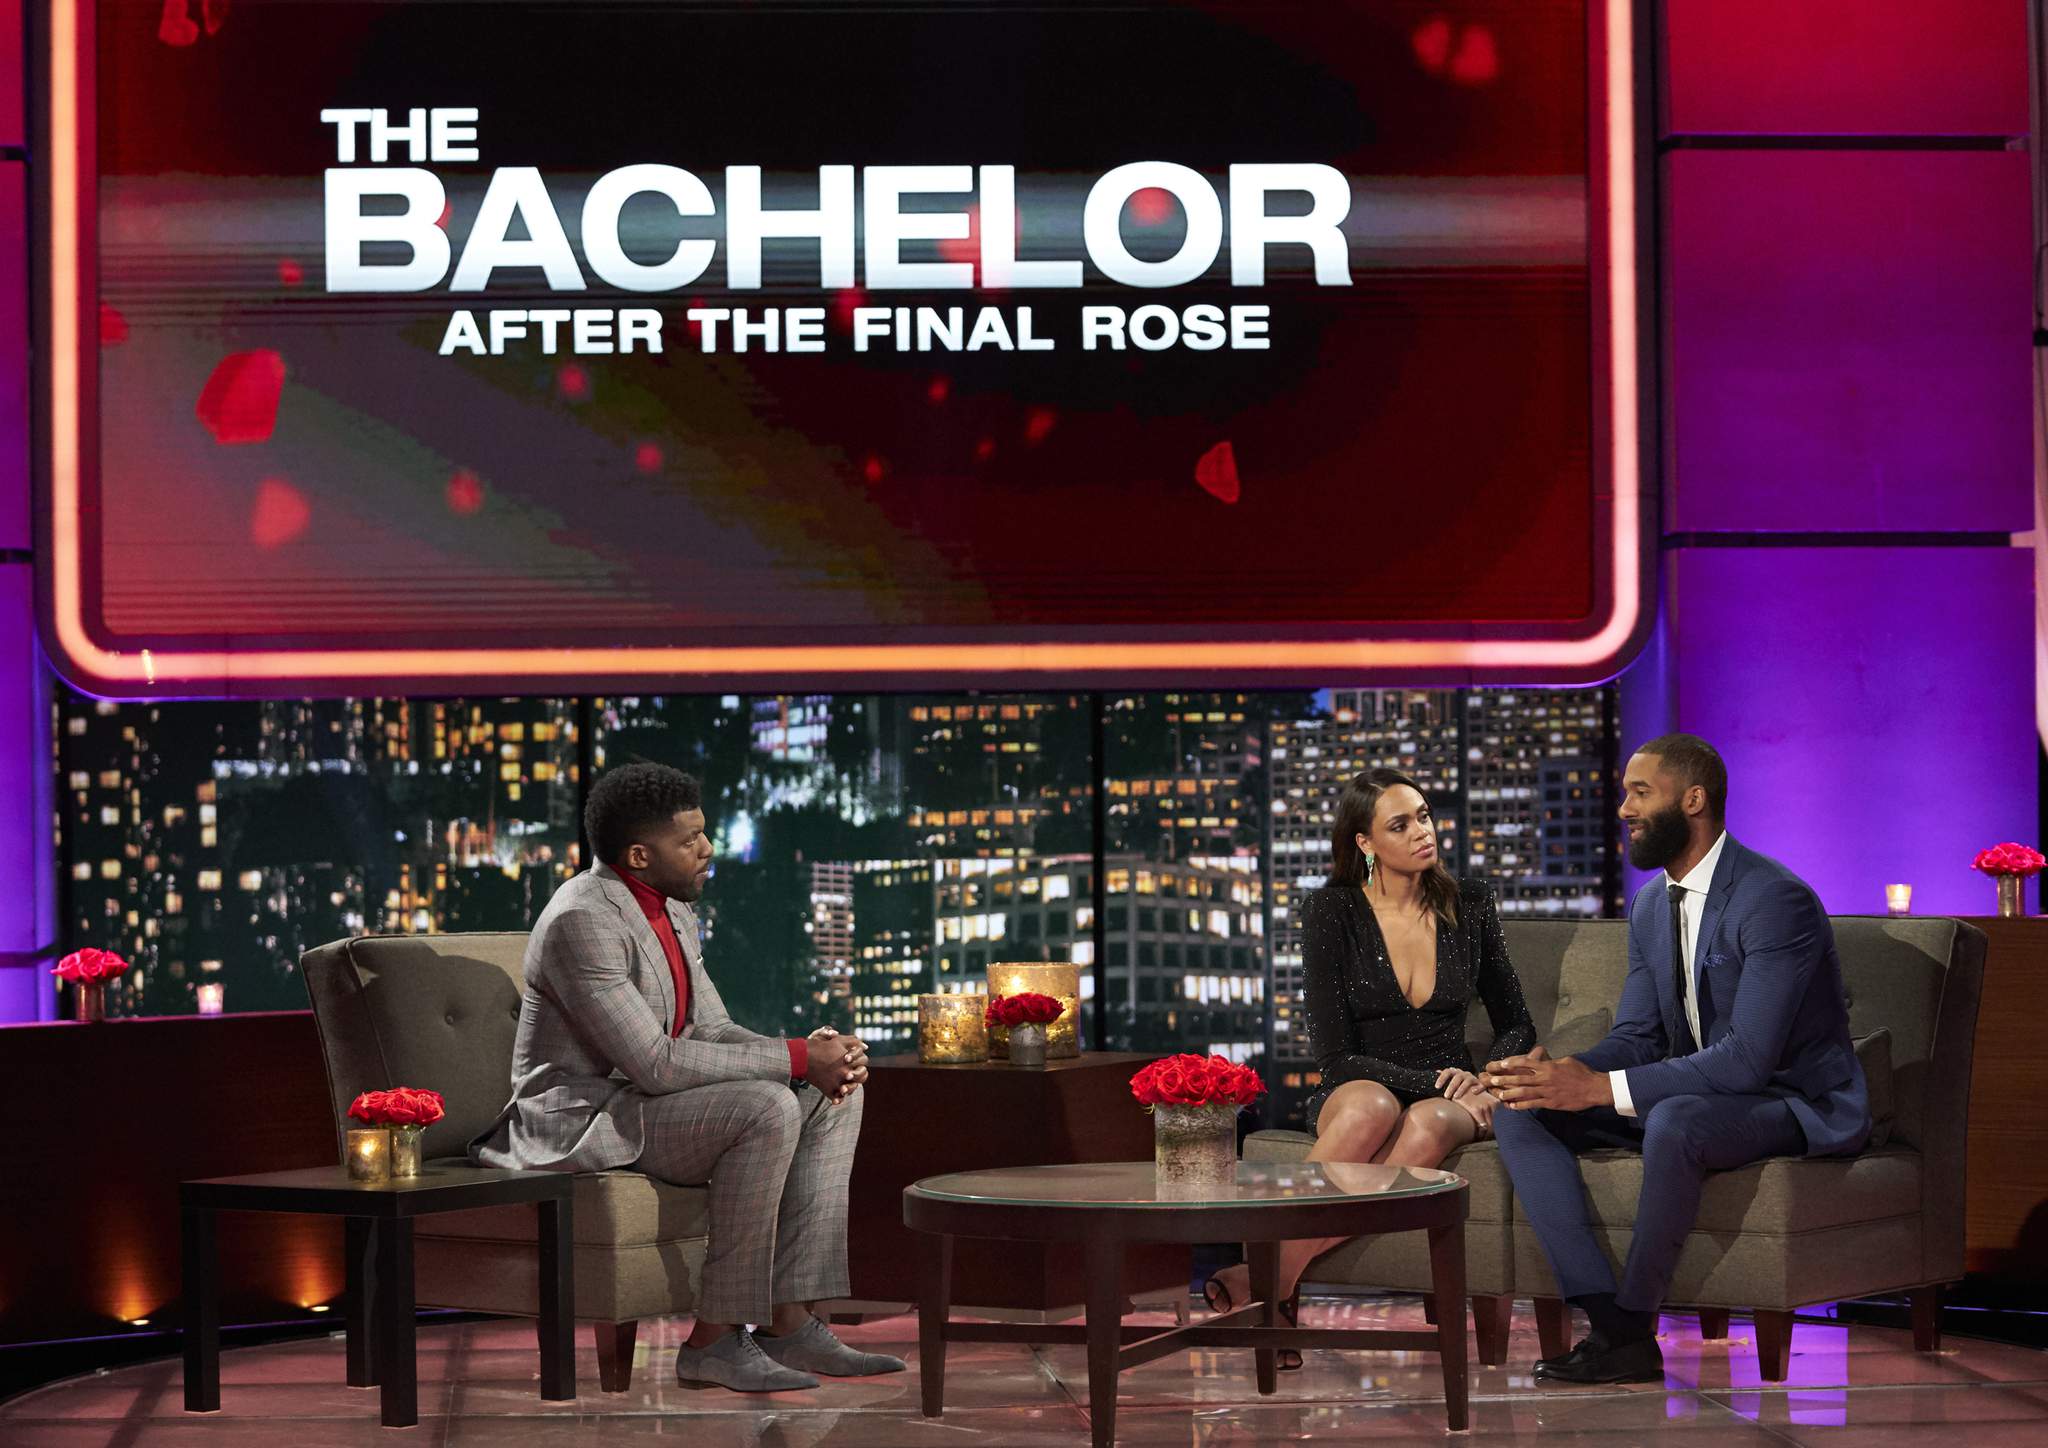 'The Bachelor' ends controversial season with ratings high